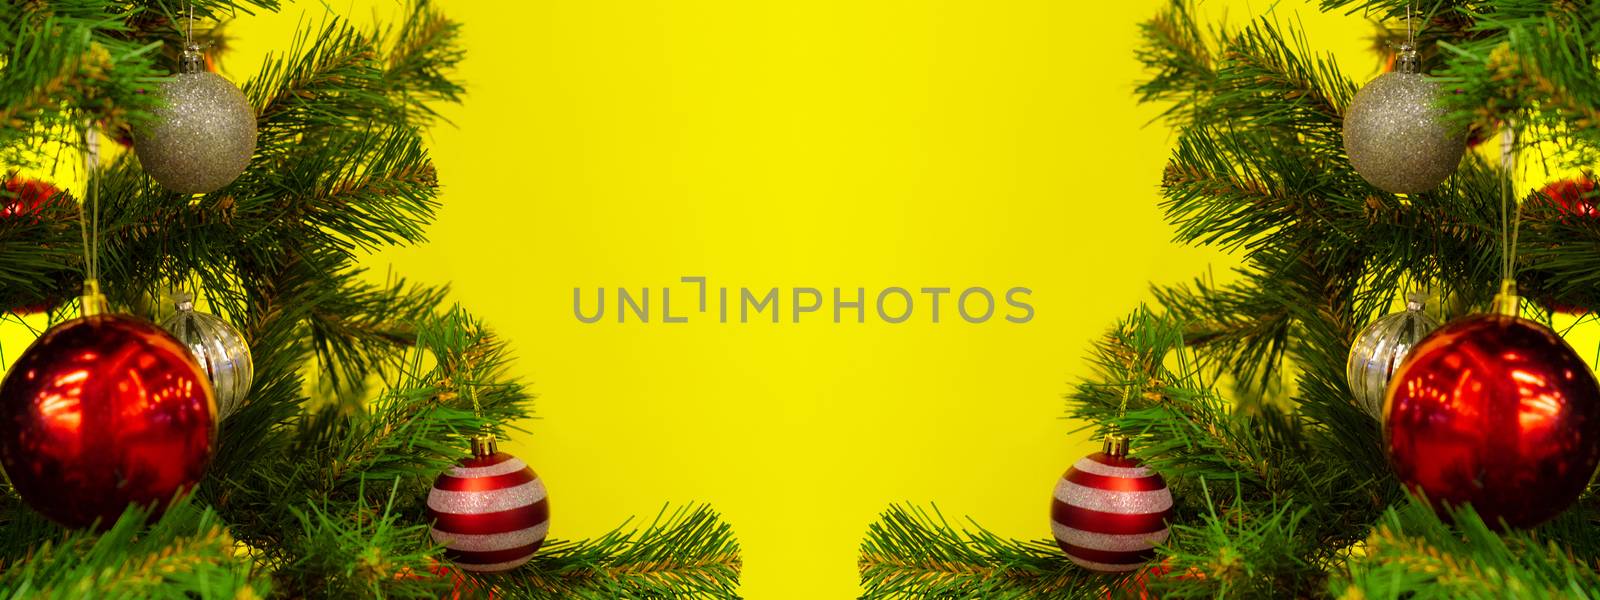 New Year and Christmas background with copy spase. Christmas branches frame on yellow.